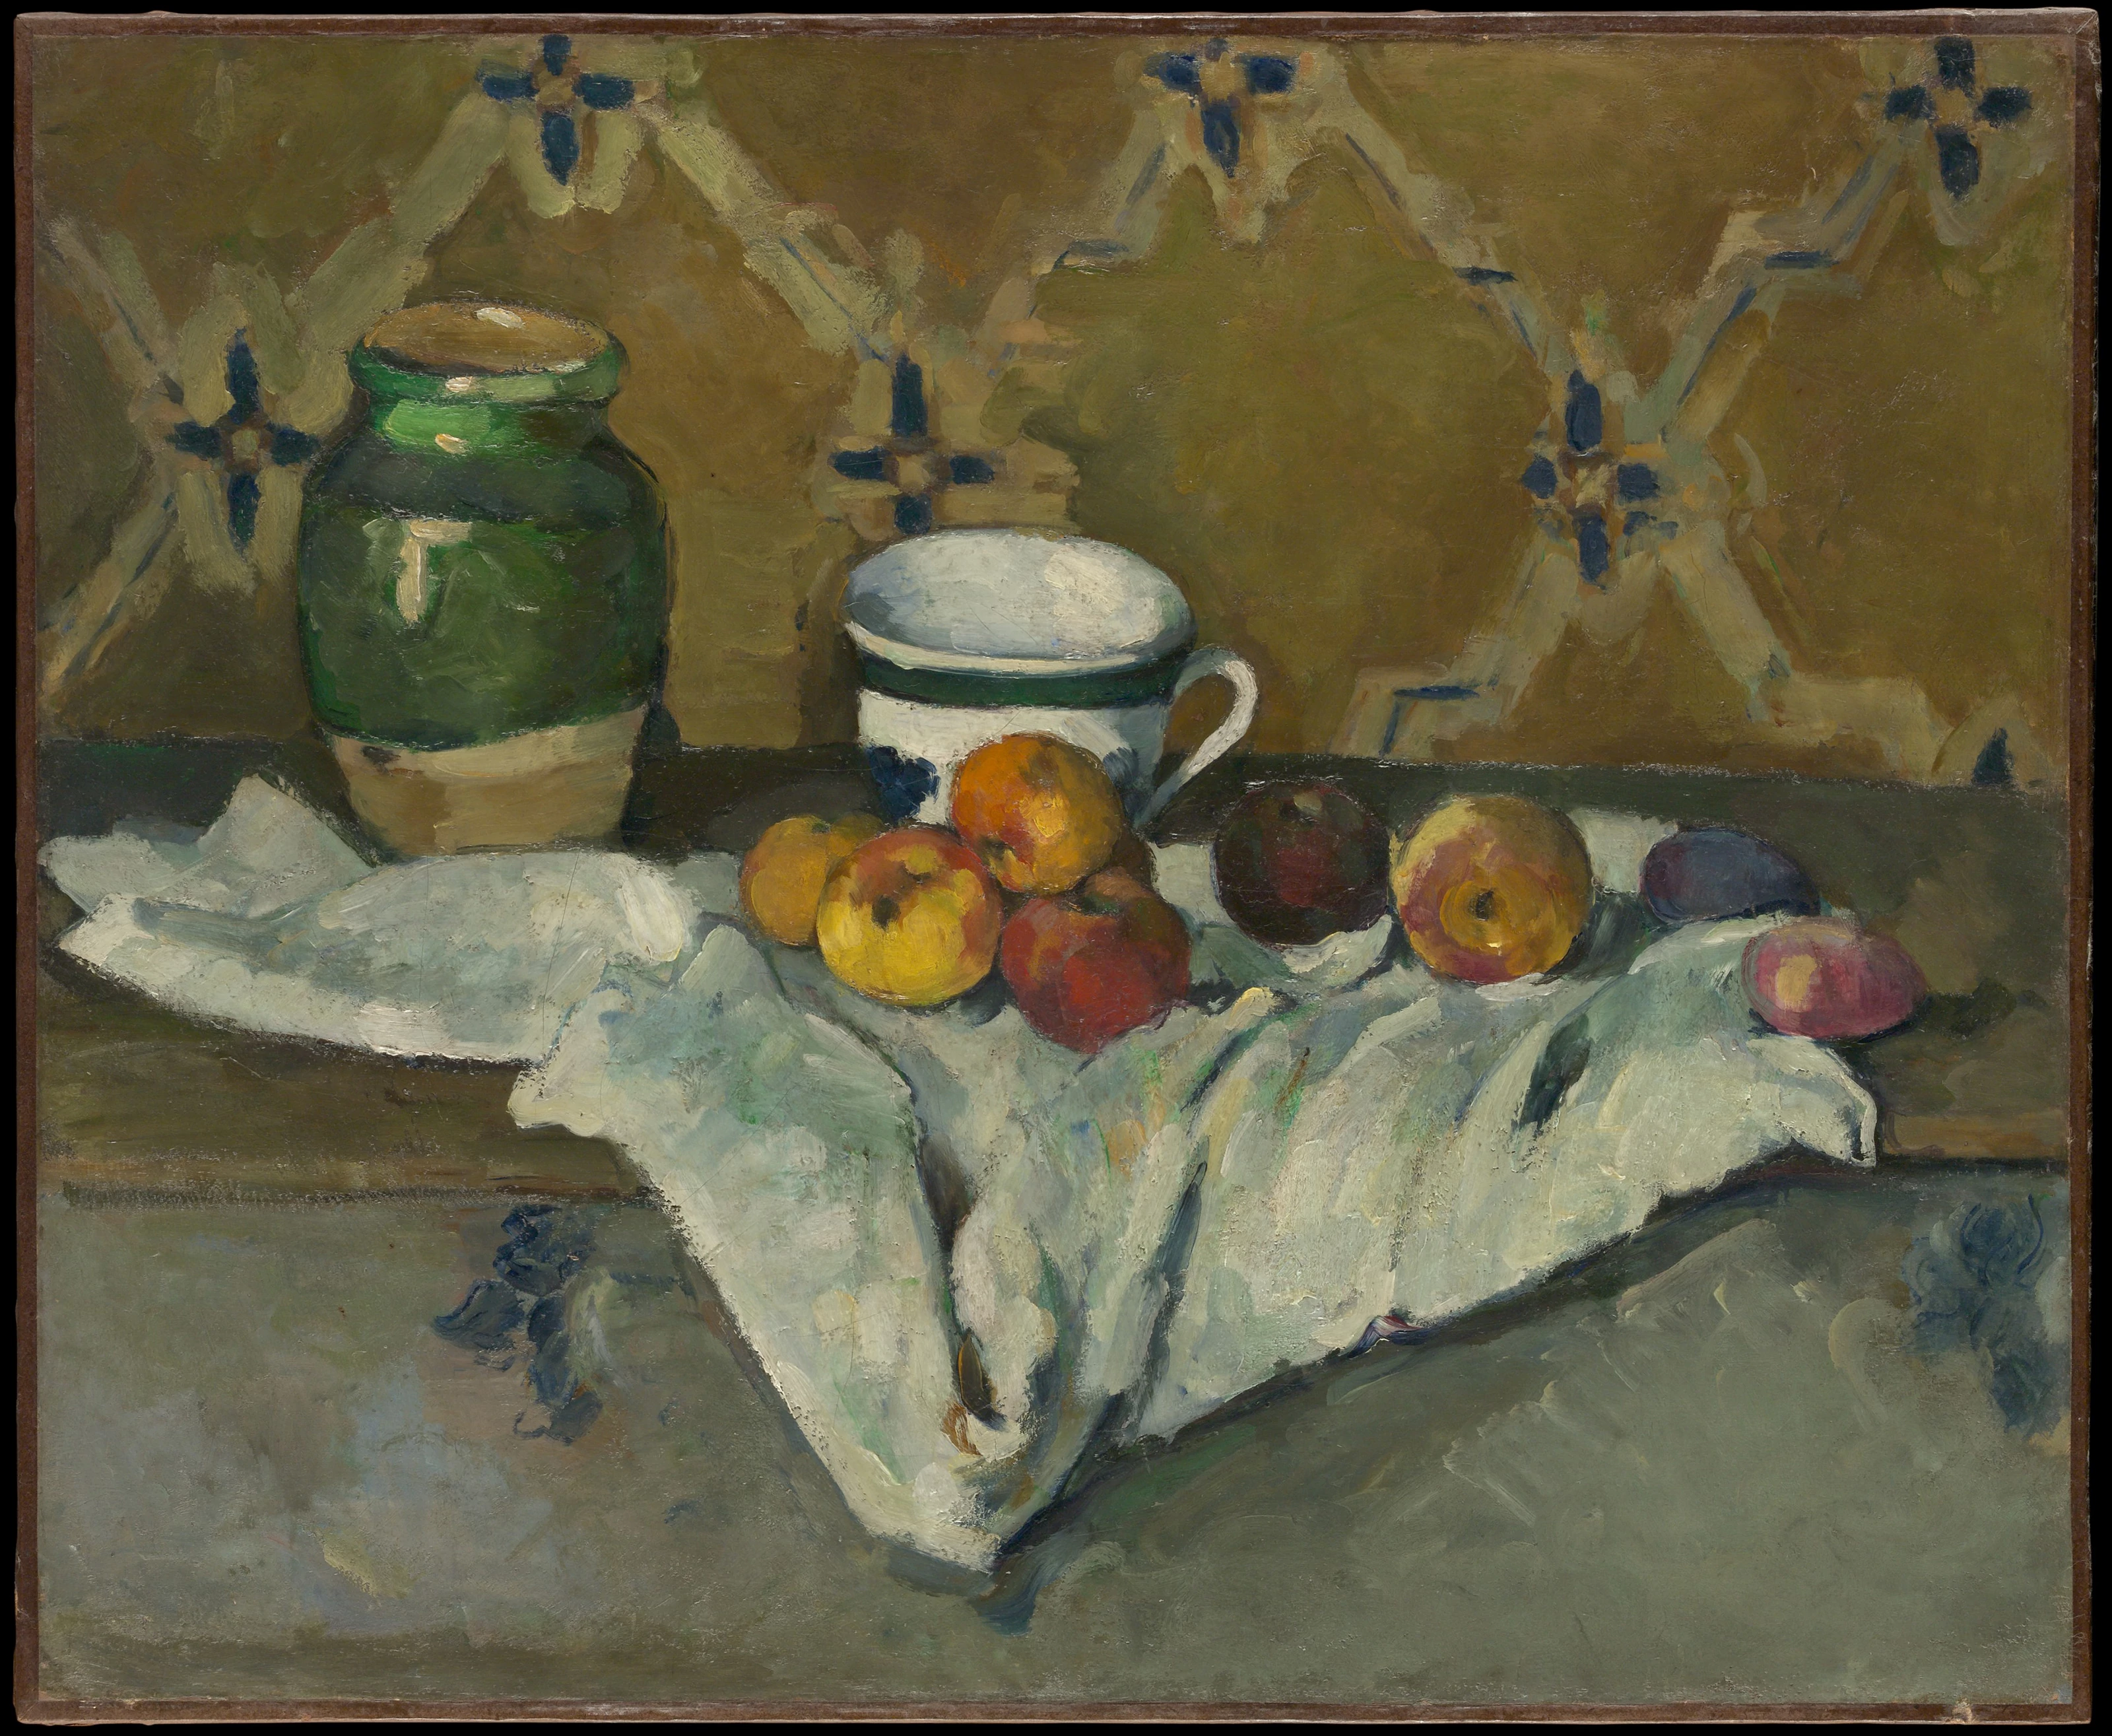 Still Life with Jar, Cup, and Apples, Paul Cézanne